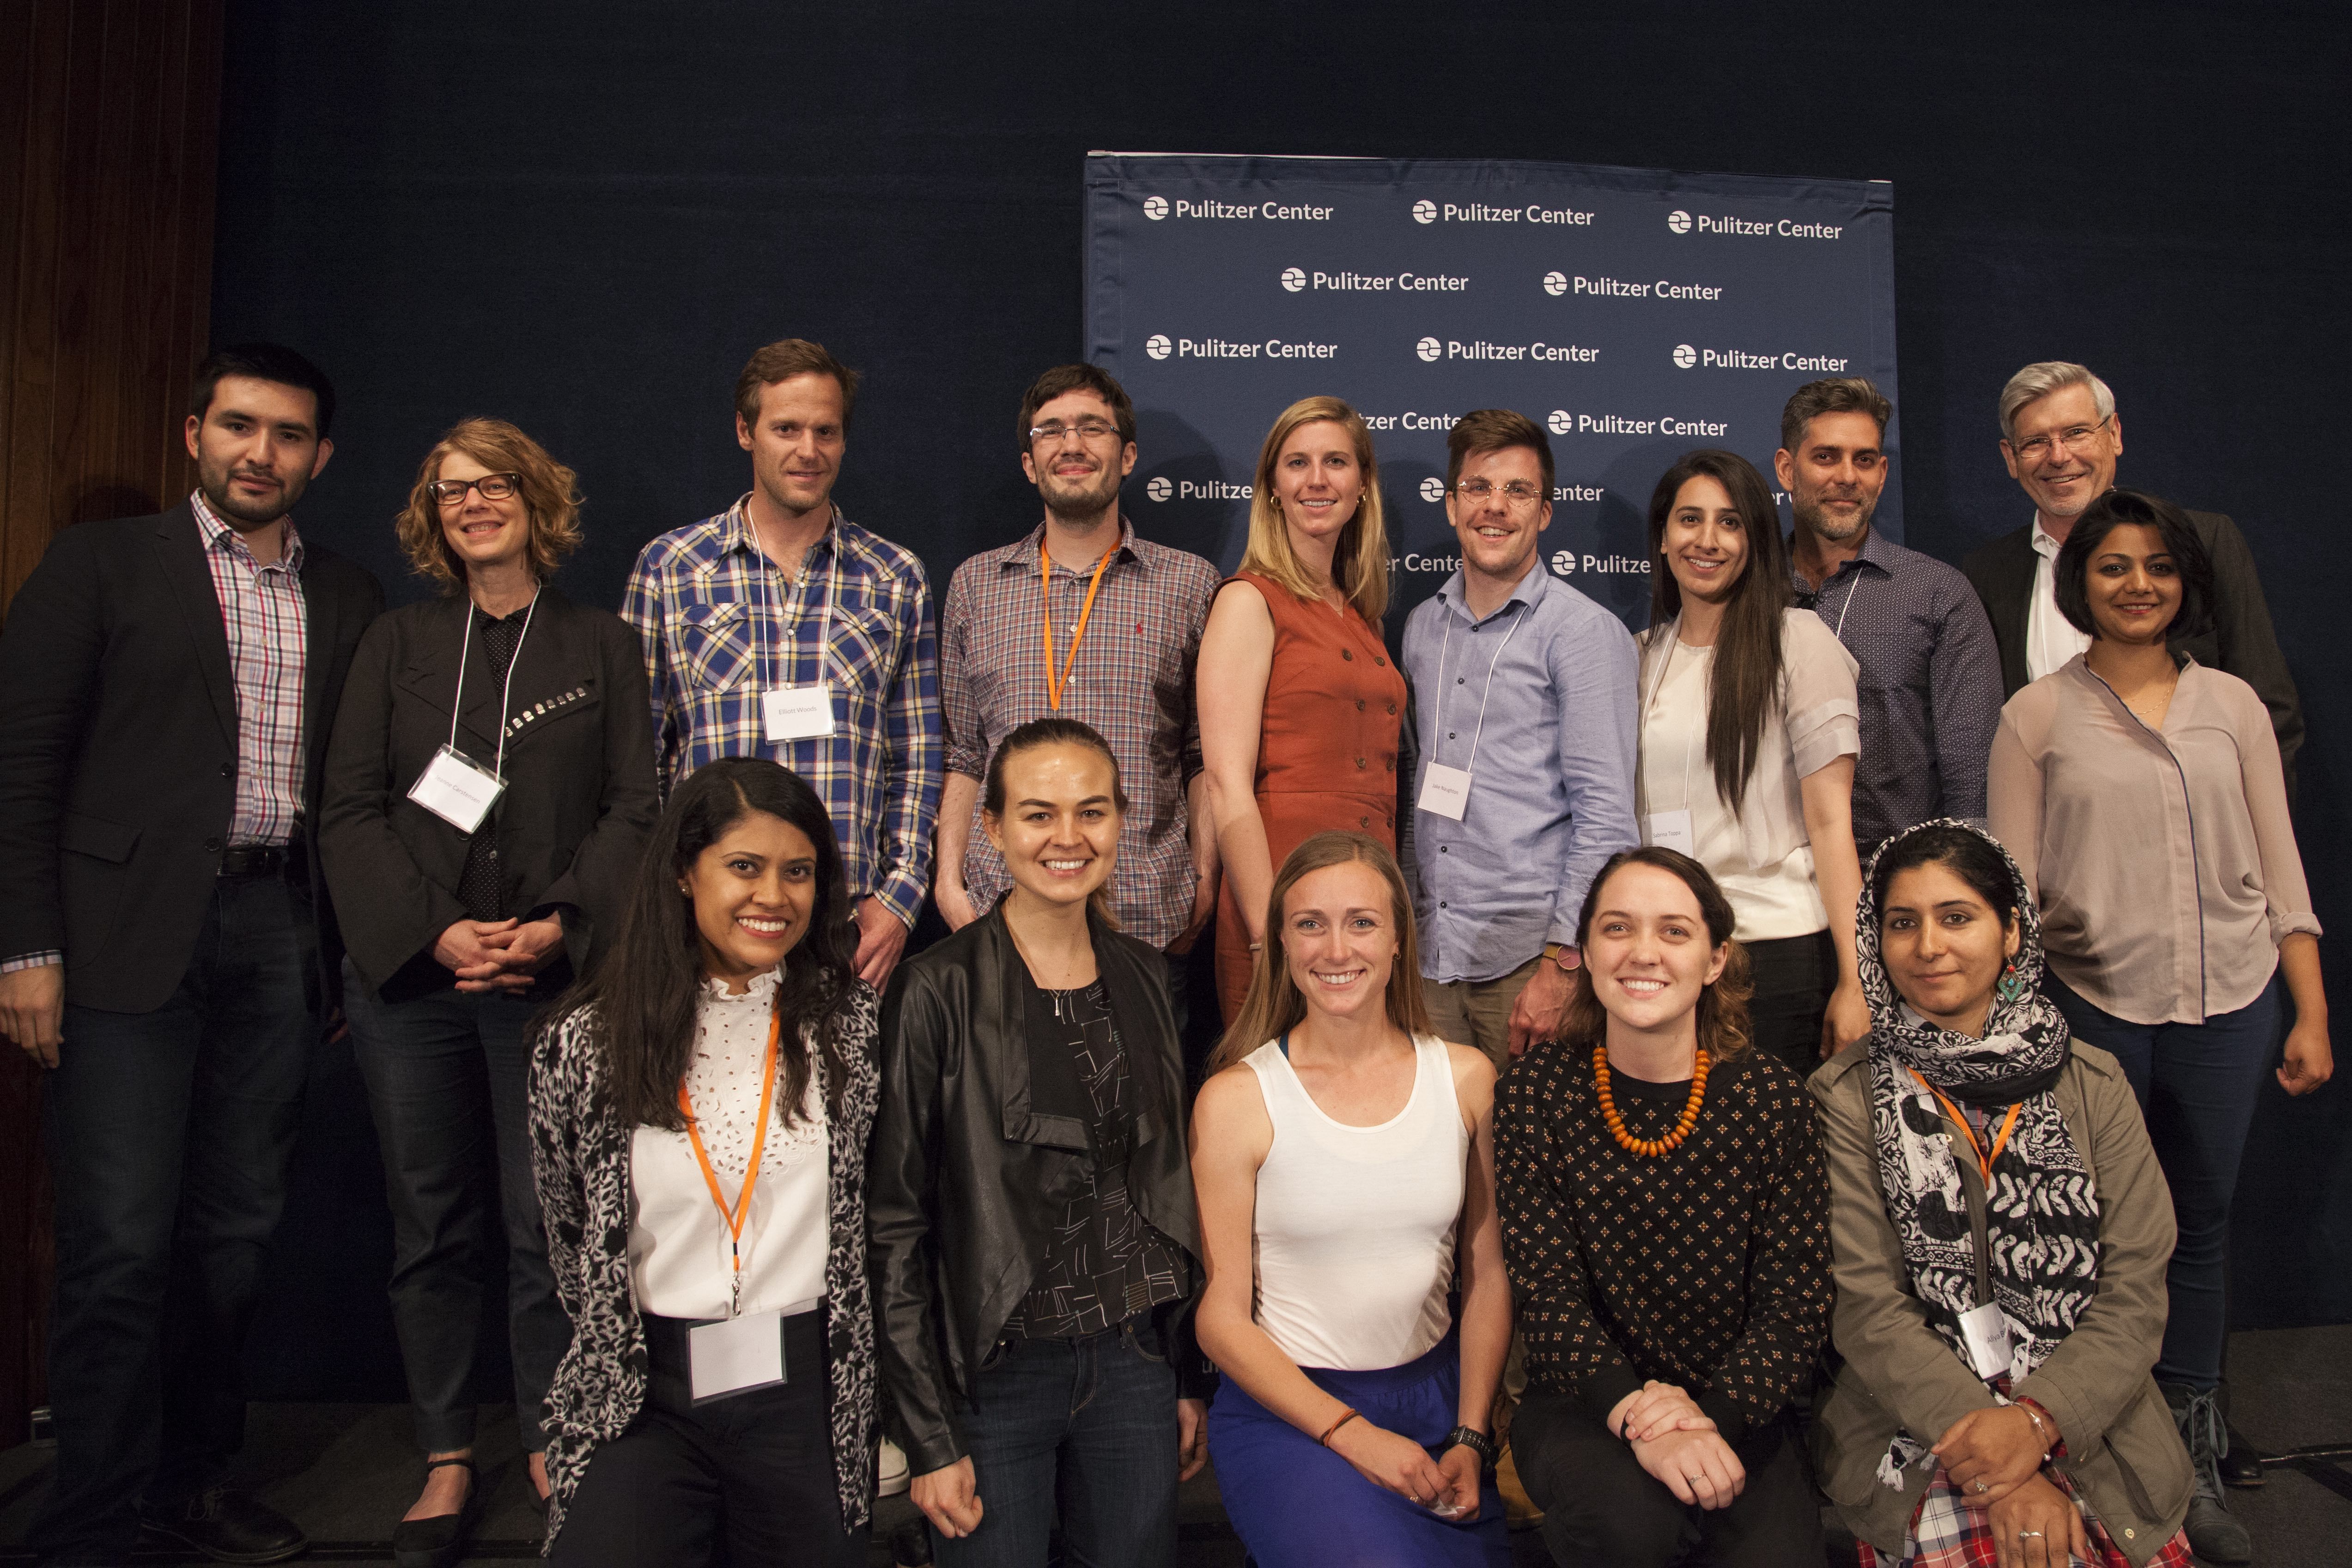 Freelancers who are participating in a Pulitzer Center-funded for a five-day hostile environment and first-aid training course beginning June 4, 2017, in Philadelphia, pose together at the Pulitzer Center Gender Lens Conference. Image by Jin Ding. United States, 2017.